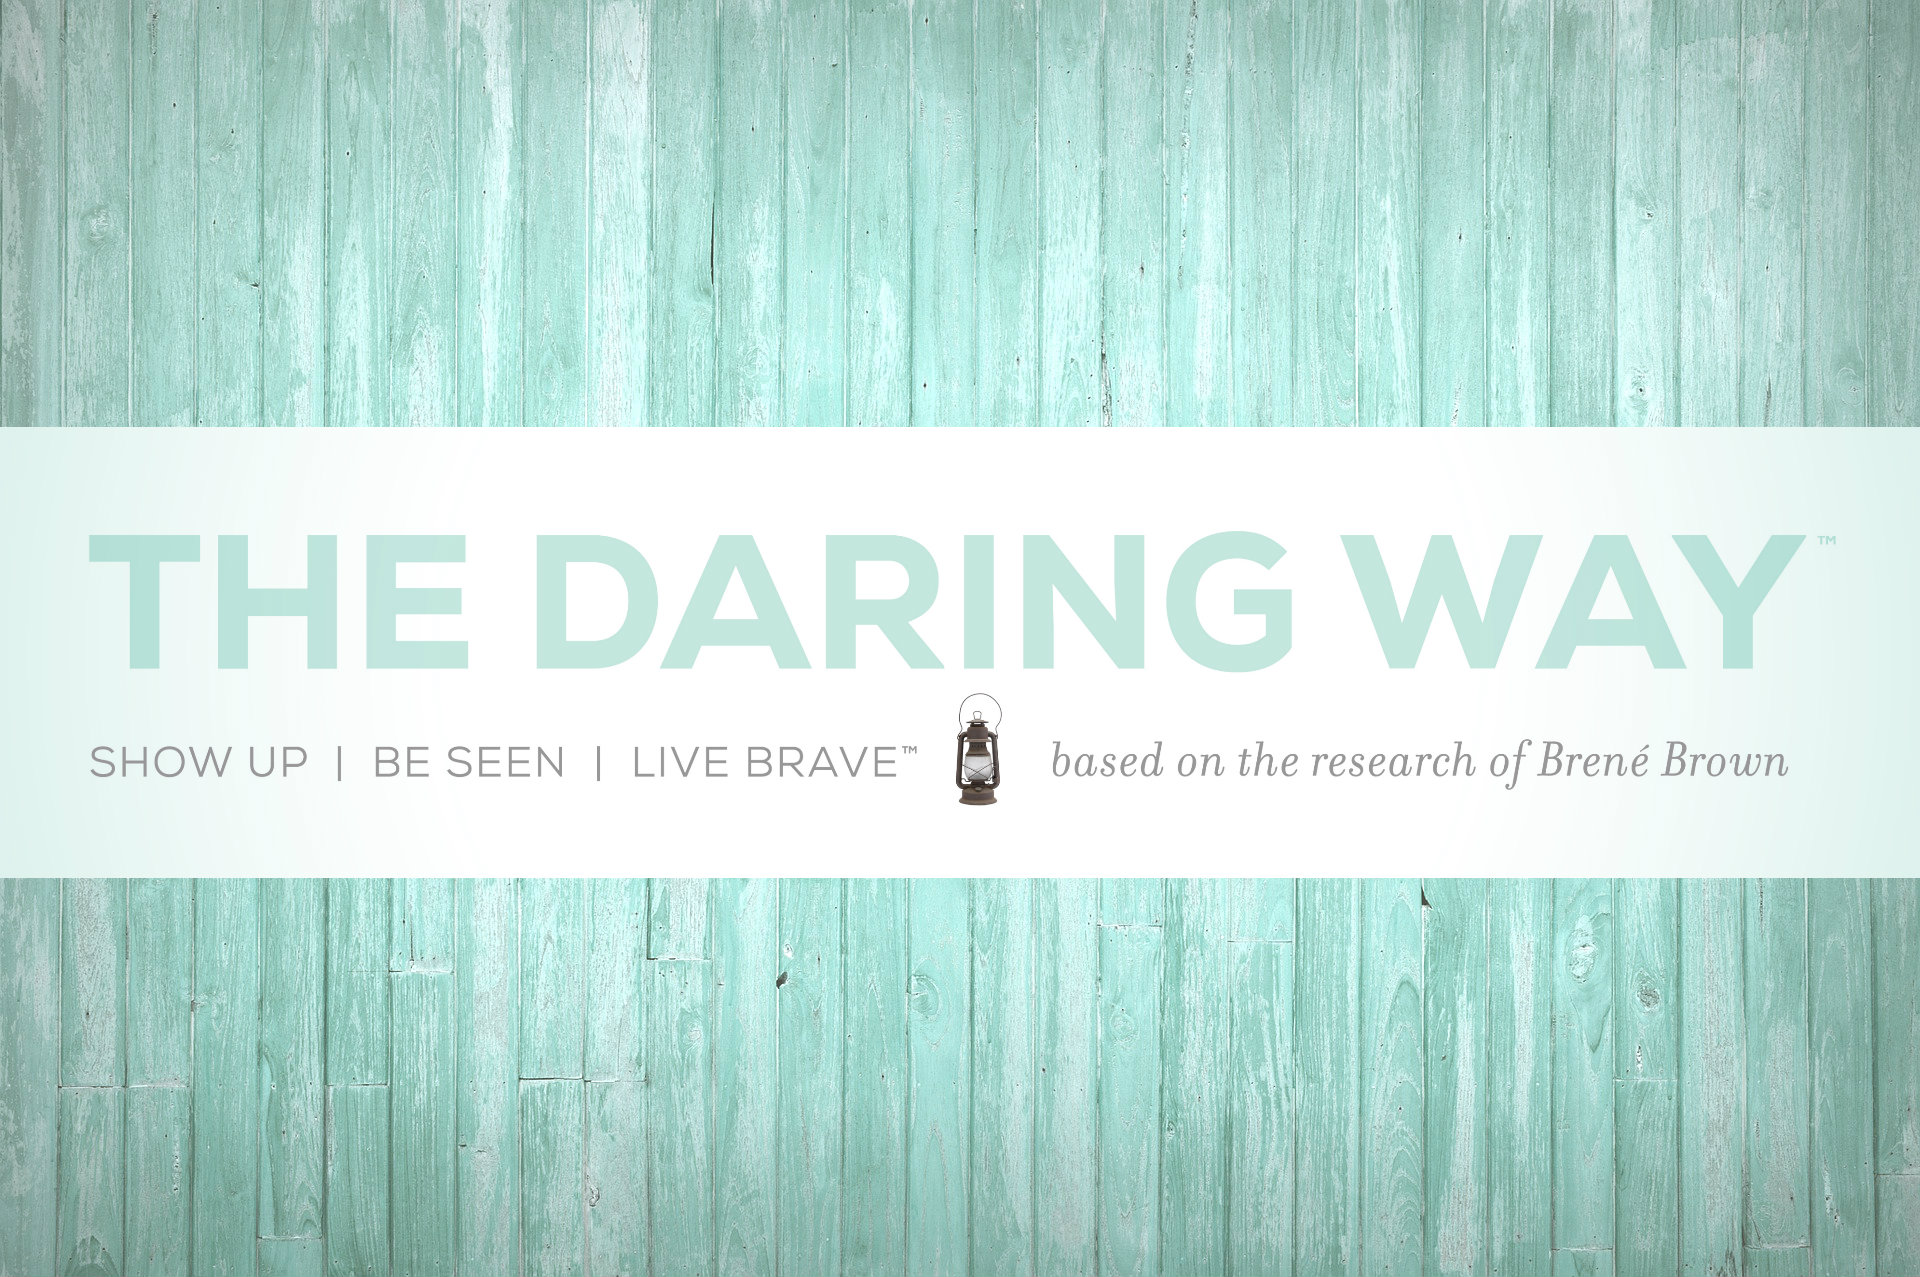 The daring way. Show up, be strong, live brave